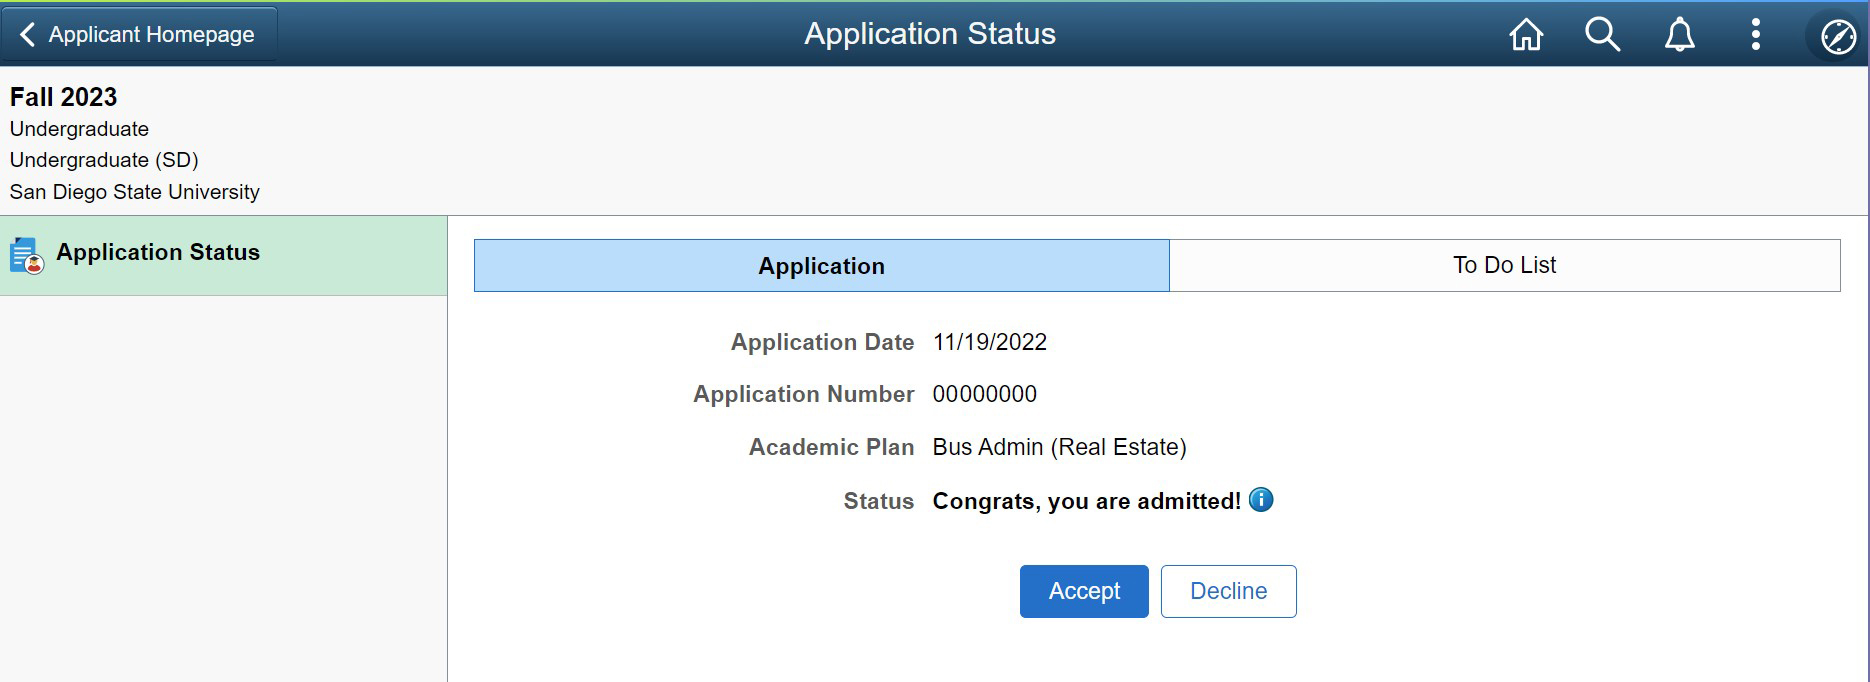 Screen showing admission status with Accept or Decline buttons.